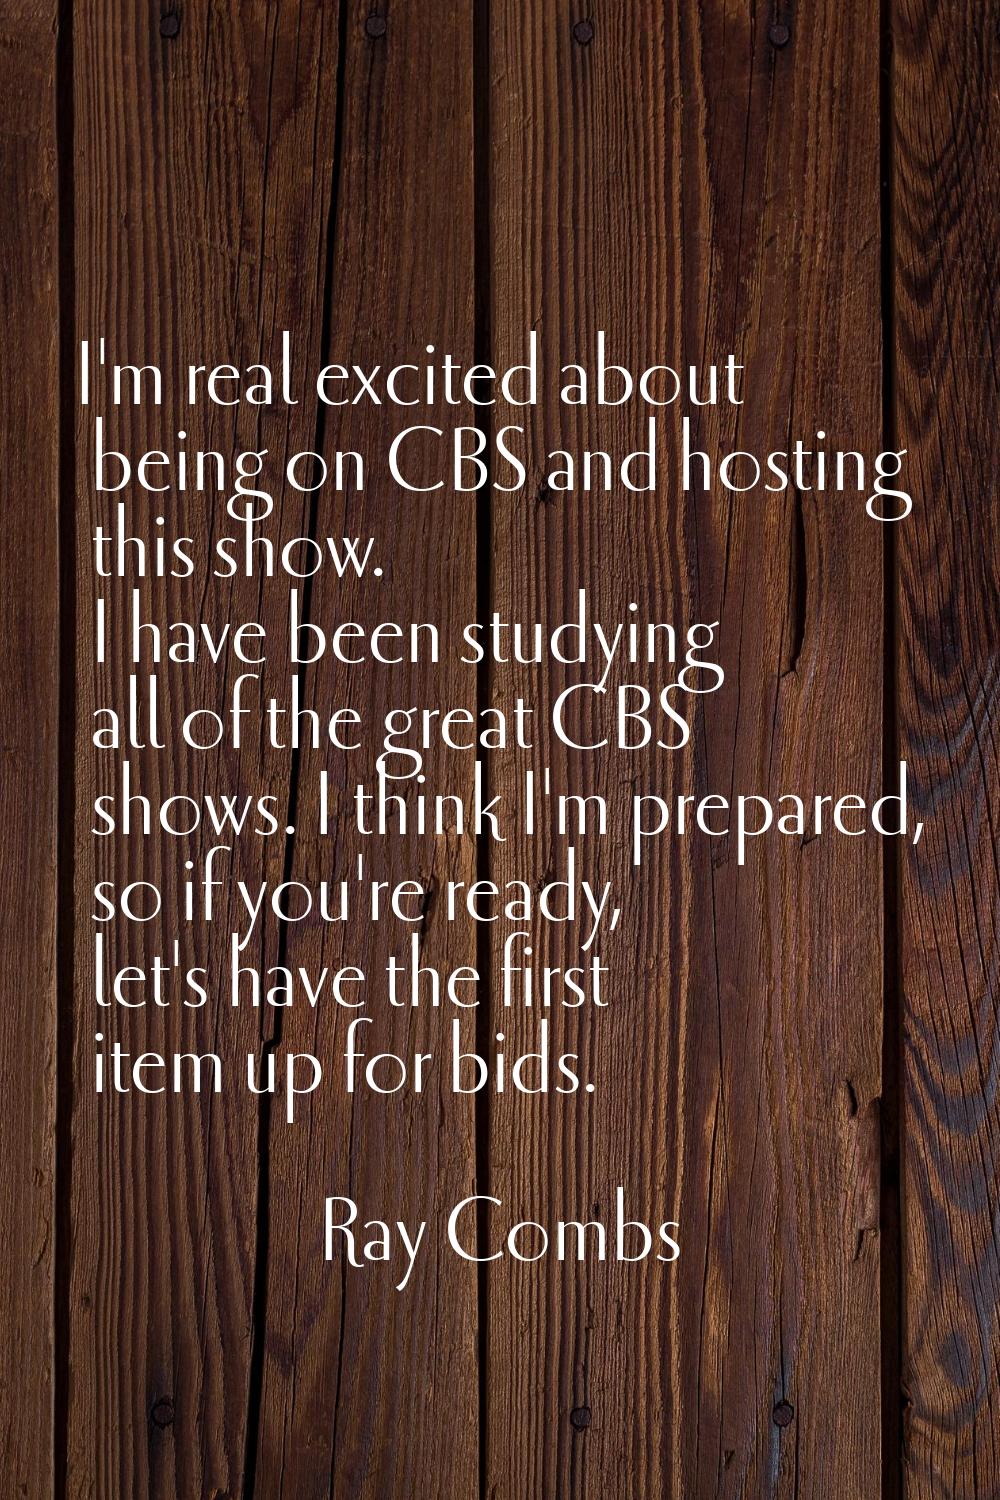 I'm real excited about being on CBS and hosting this show. I have been studying all of the great CB